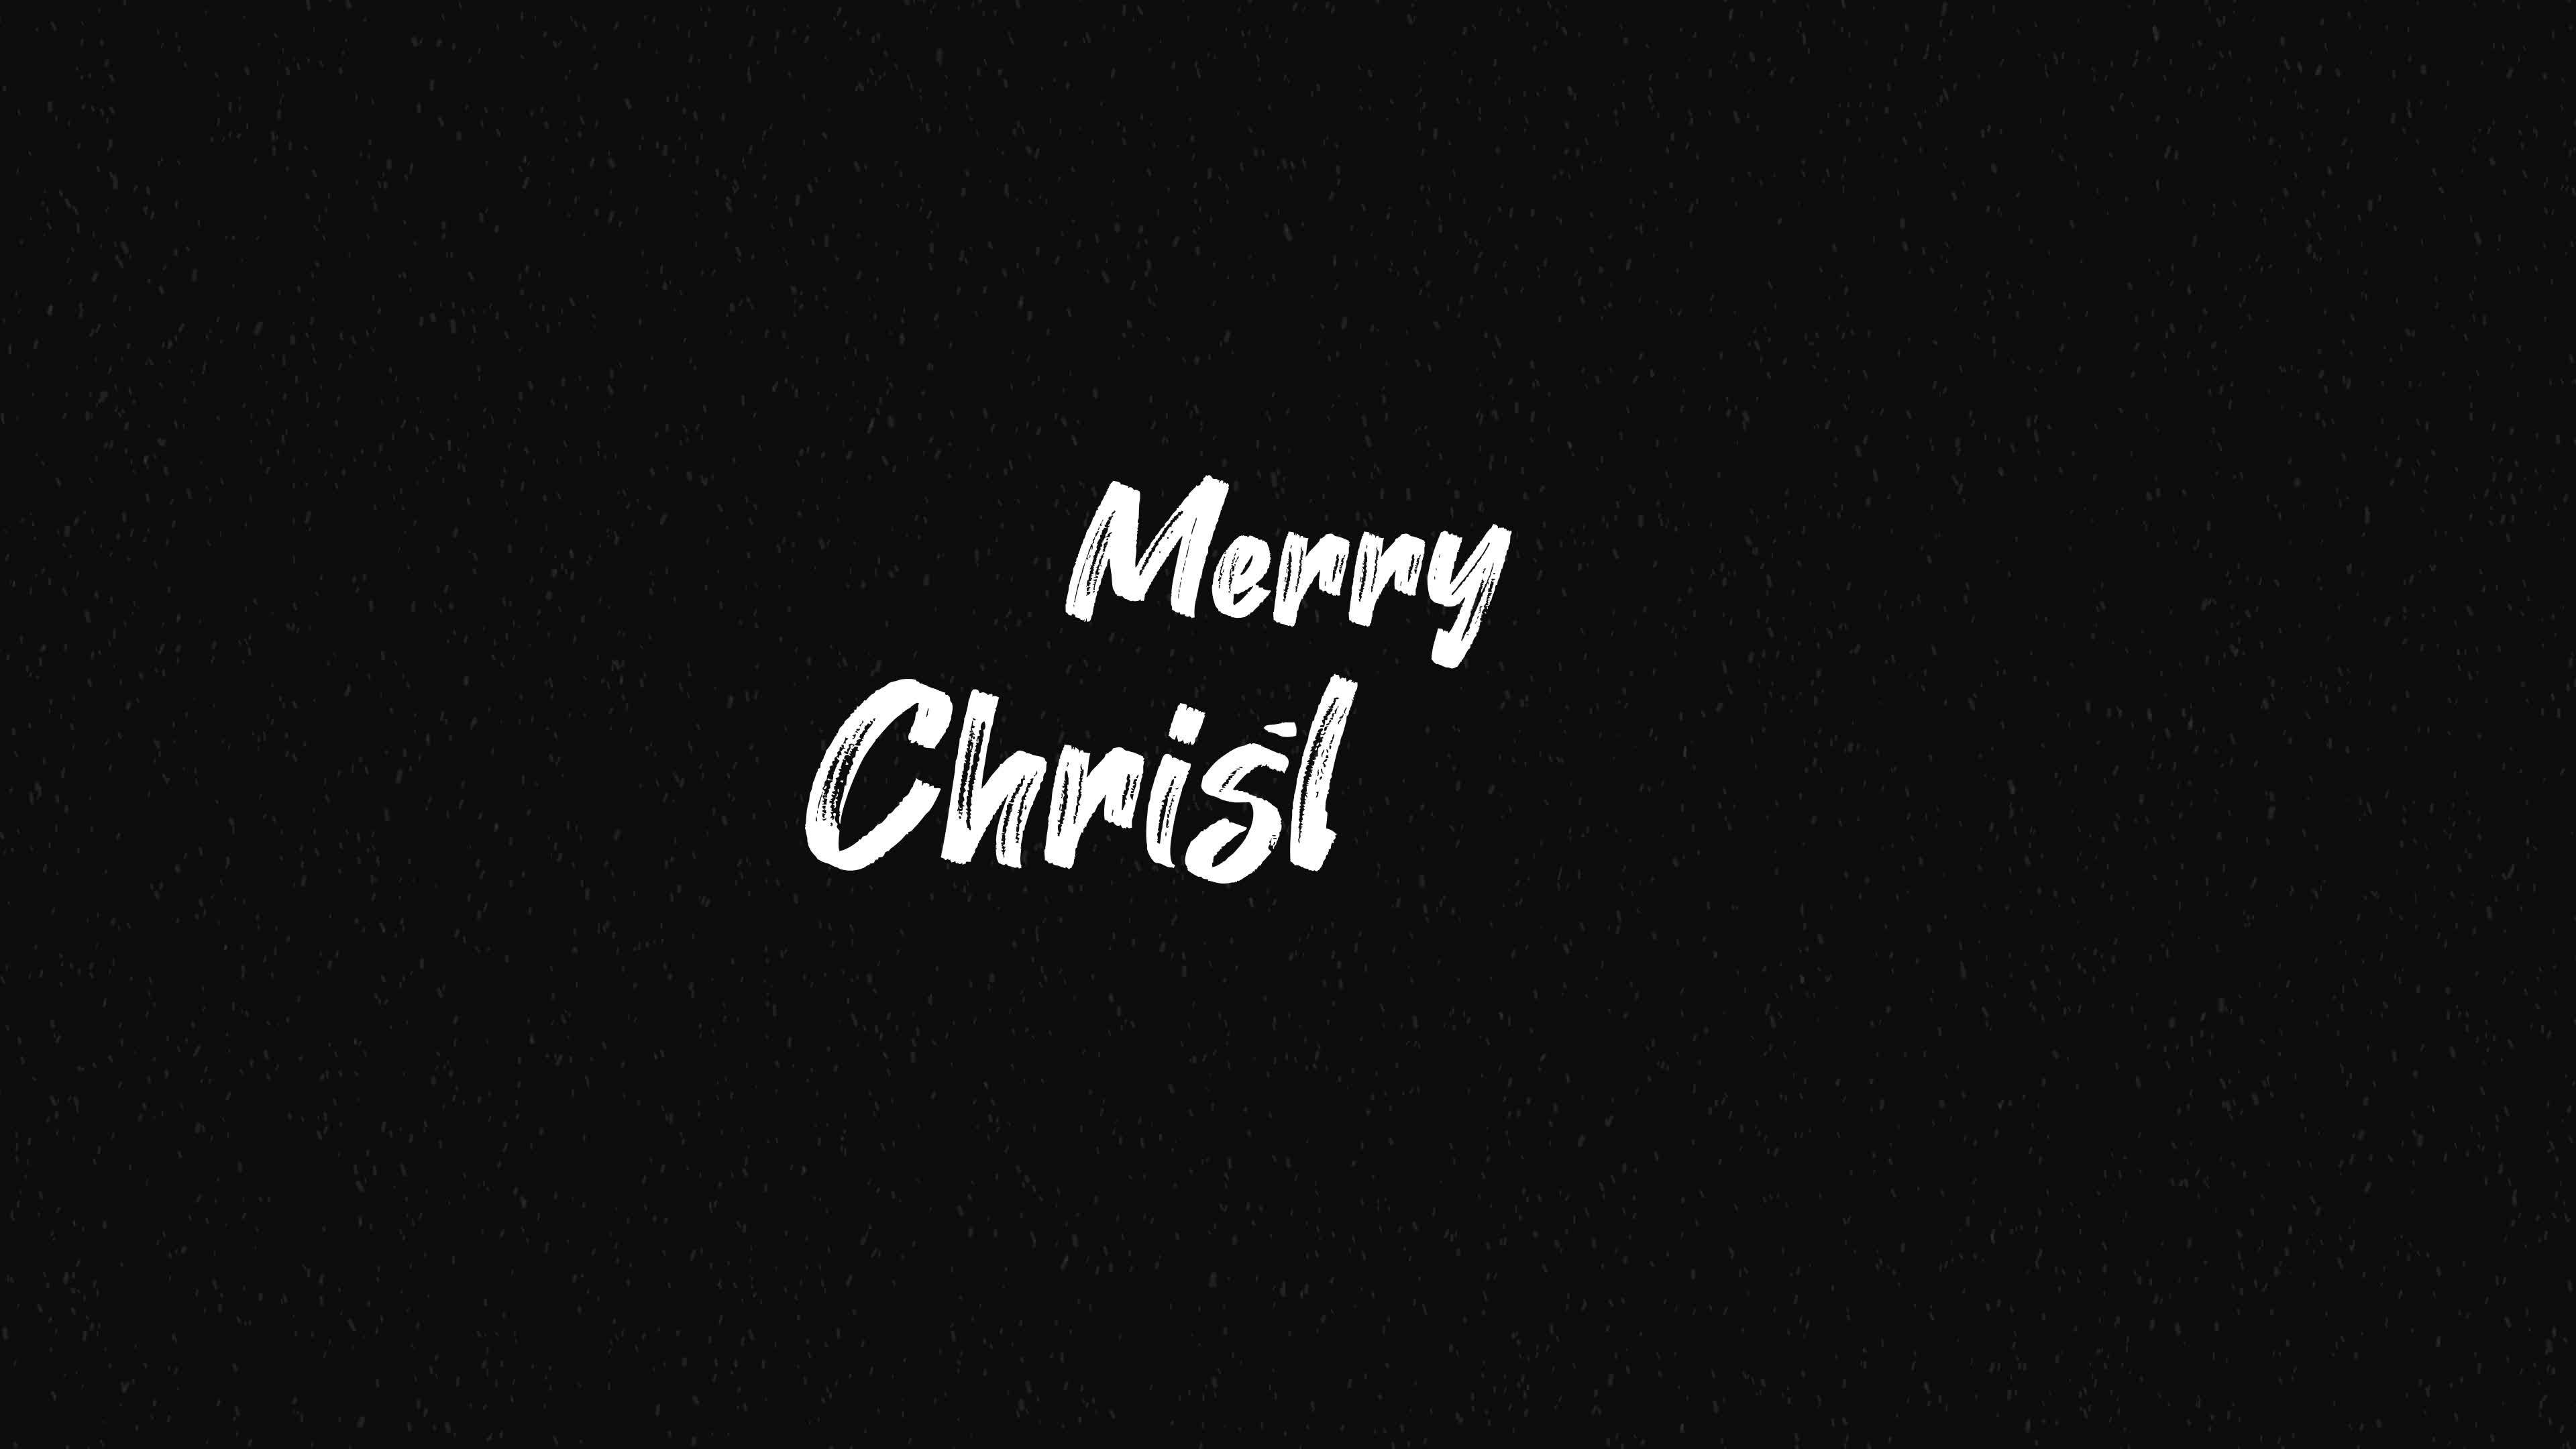 Animated Merry Christmas Stock Video Footage for Free Download